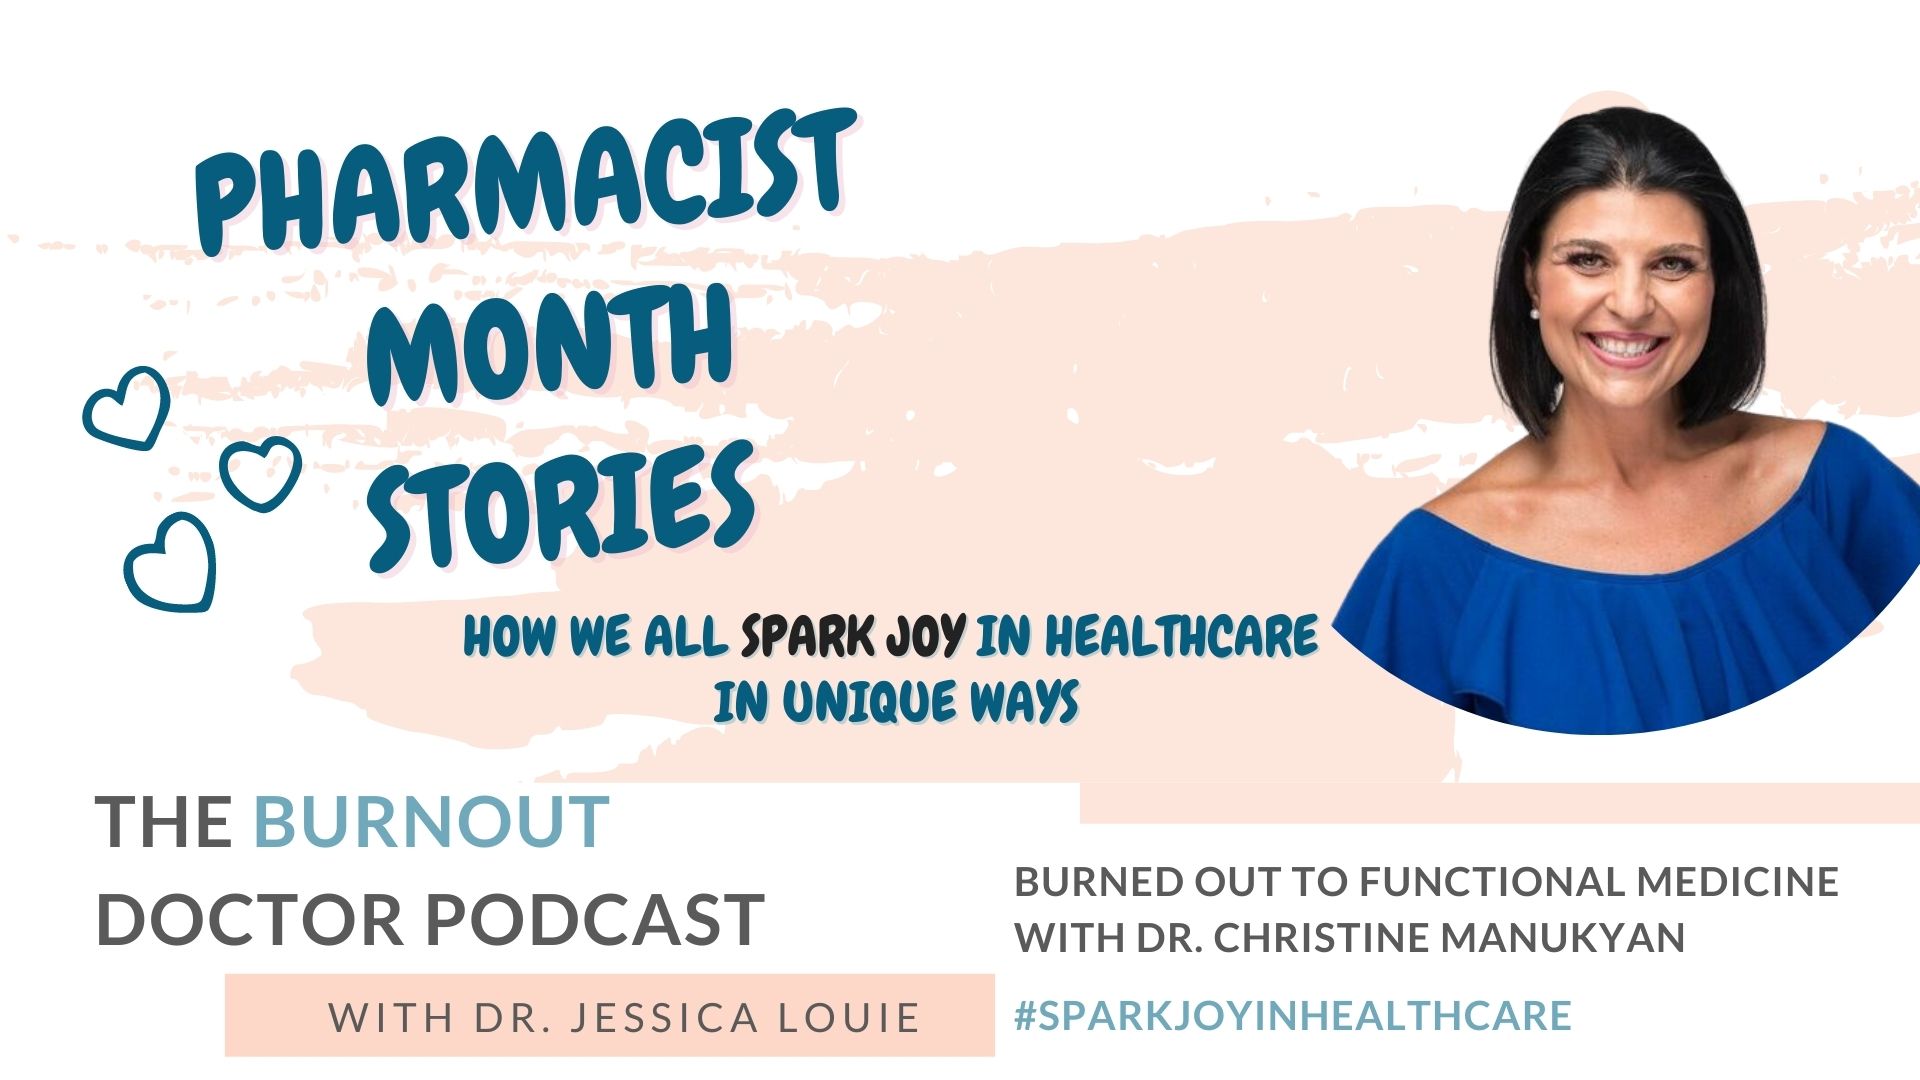 Dr. Christine Manukyan PharmD on The Burnout Doctor Podcast with Dr. Jessica Louie. Pharmacist burnout stories. Functional medicine pharmacist during Pharmacist Month.